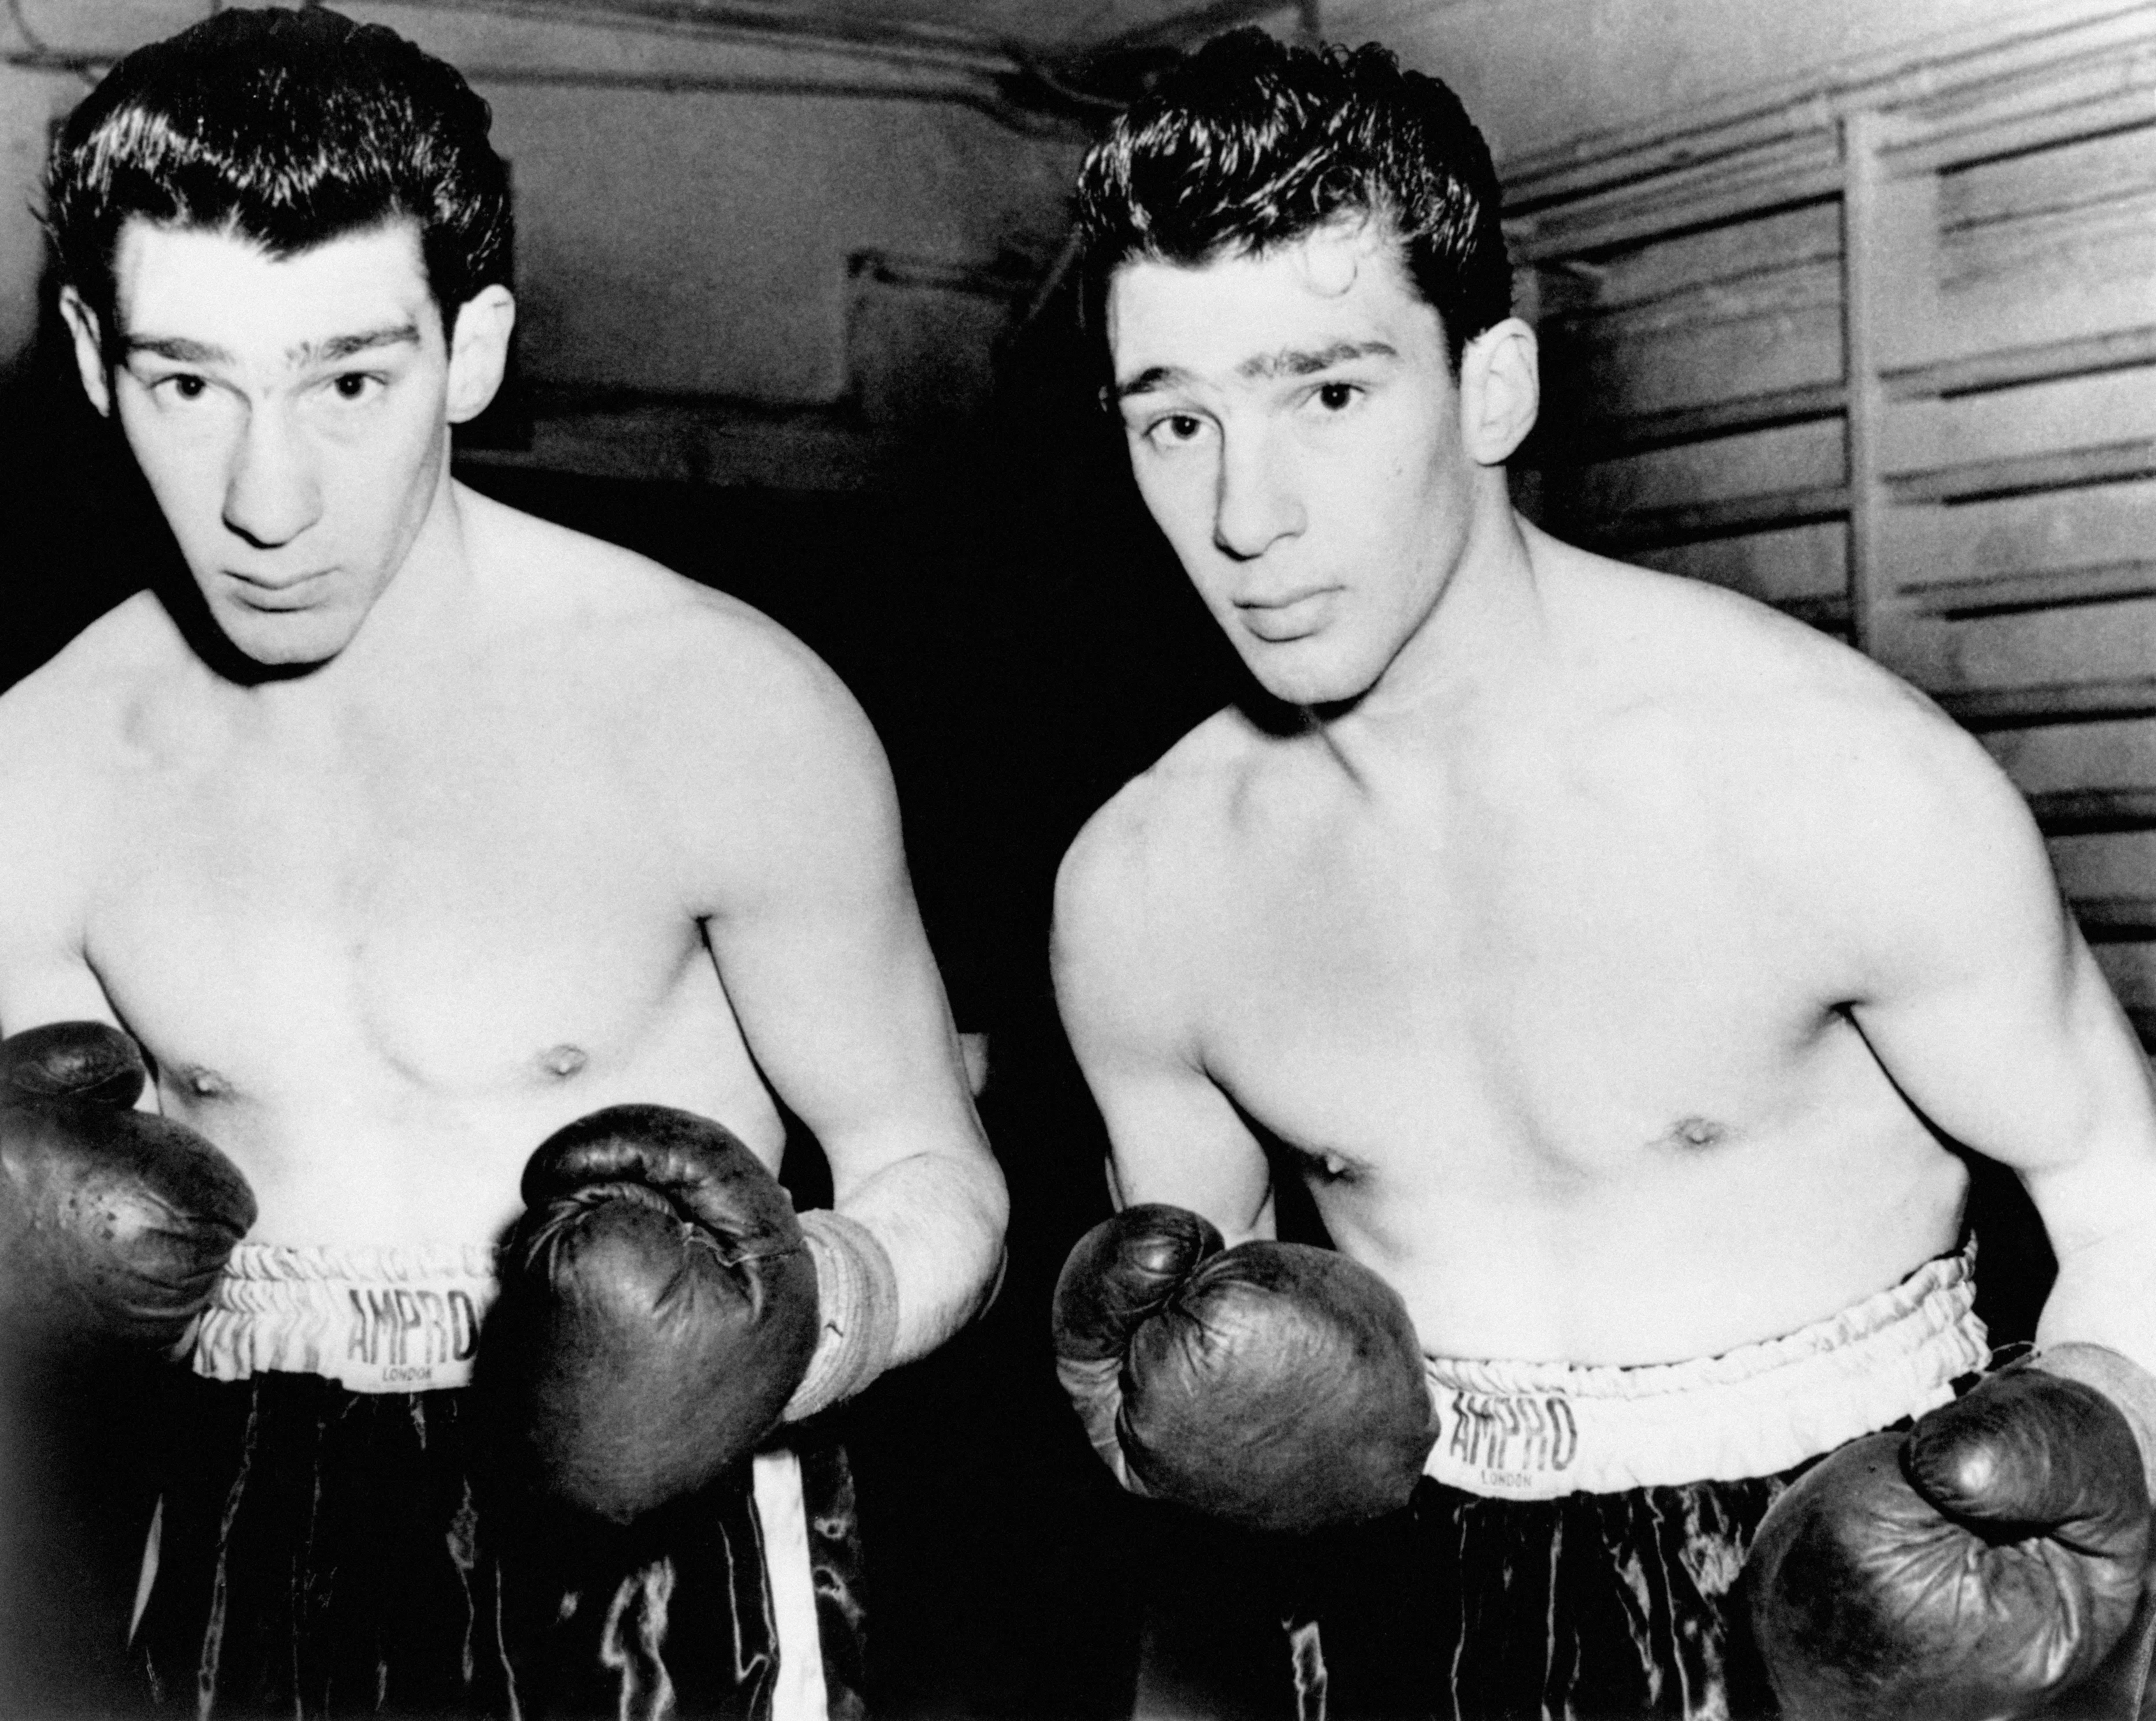 Ronnie and Reggie Kray as young men.